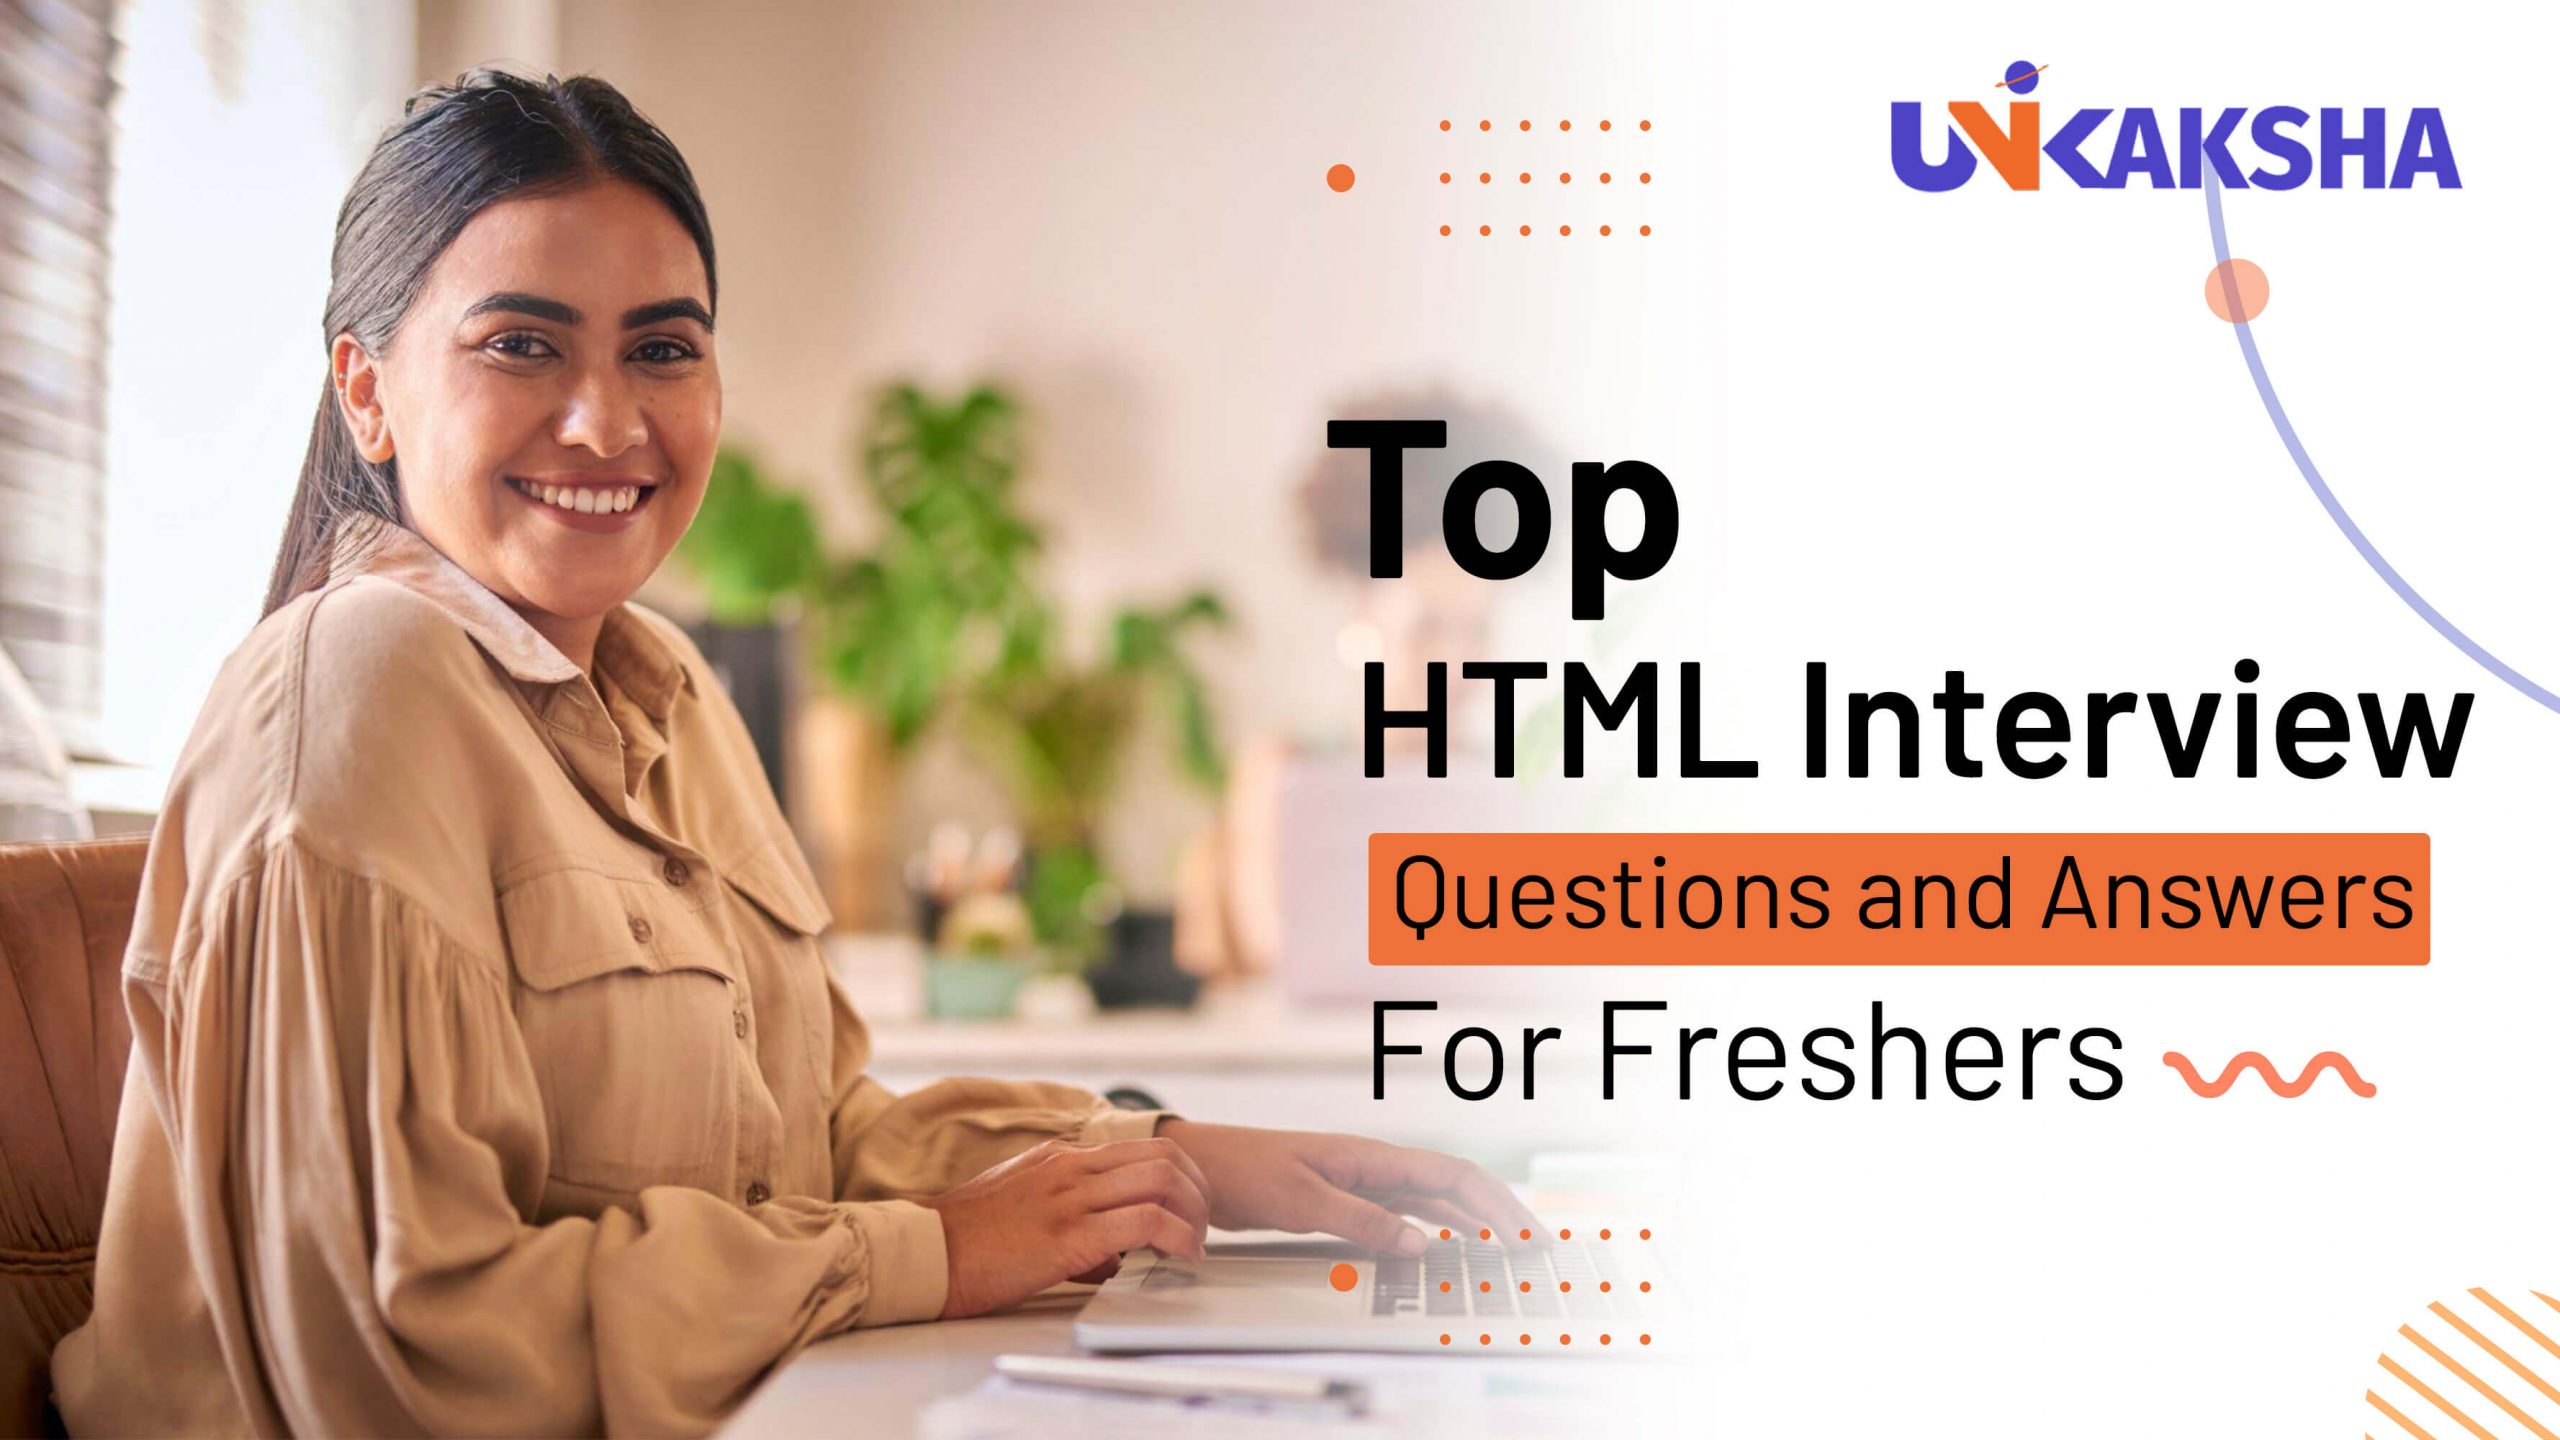 Top HTML interview questions and answers for freshers